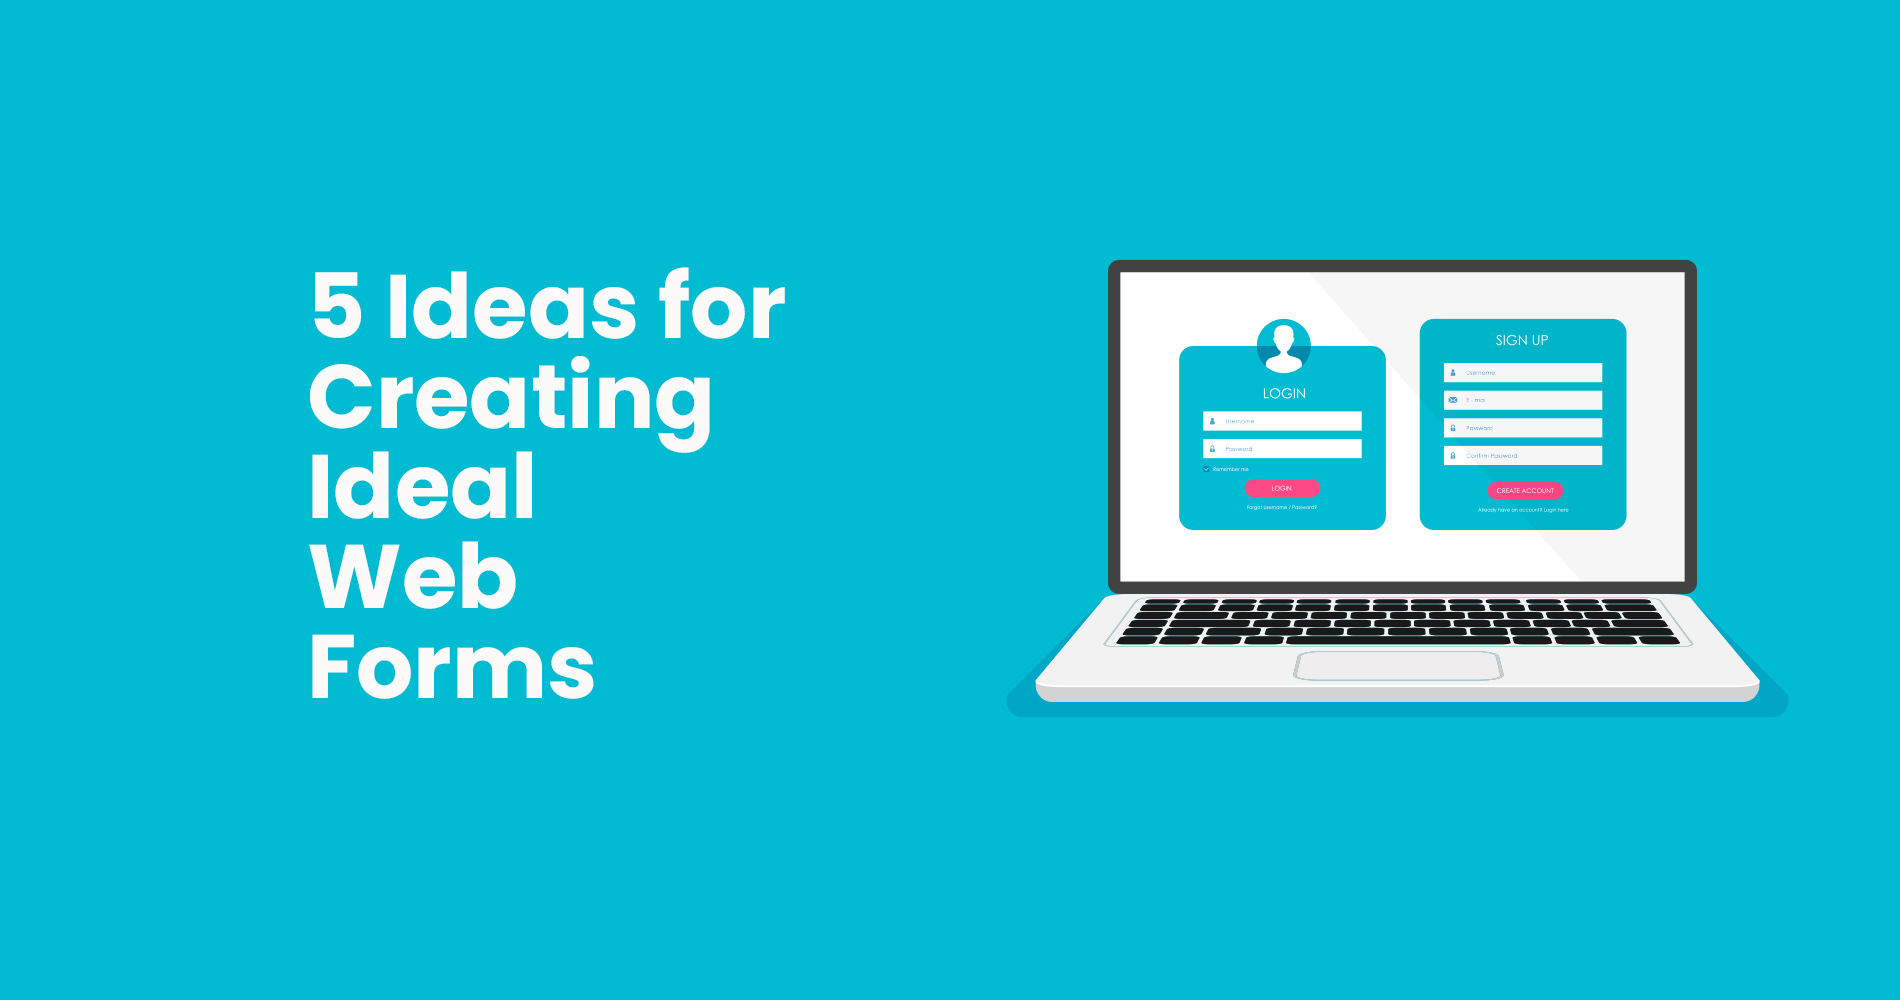 5 Ideas for Creating Ideal Web Forms